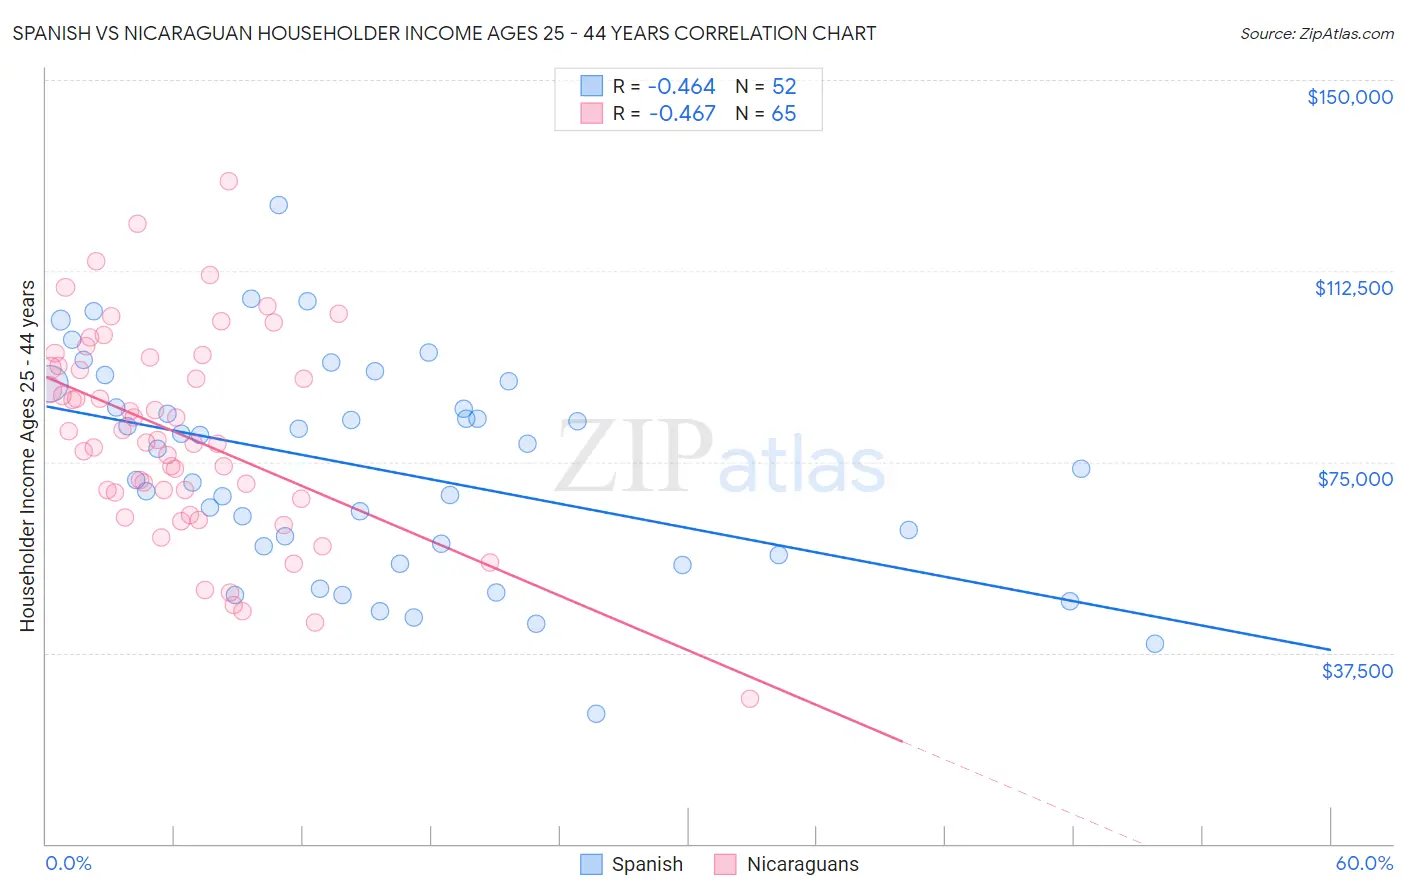 Spanish vs Nicaraguan Householder Income Ages 25 - 44 years